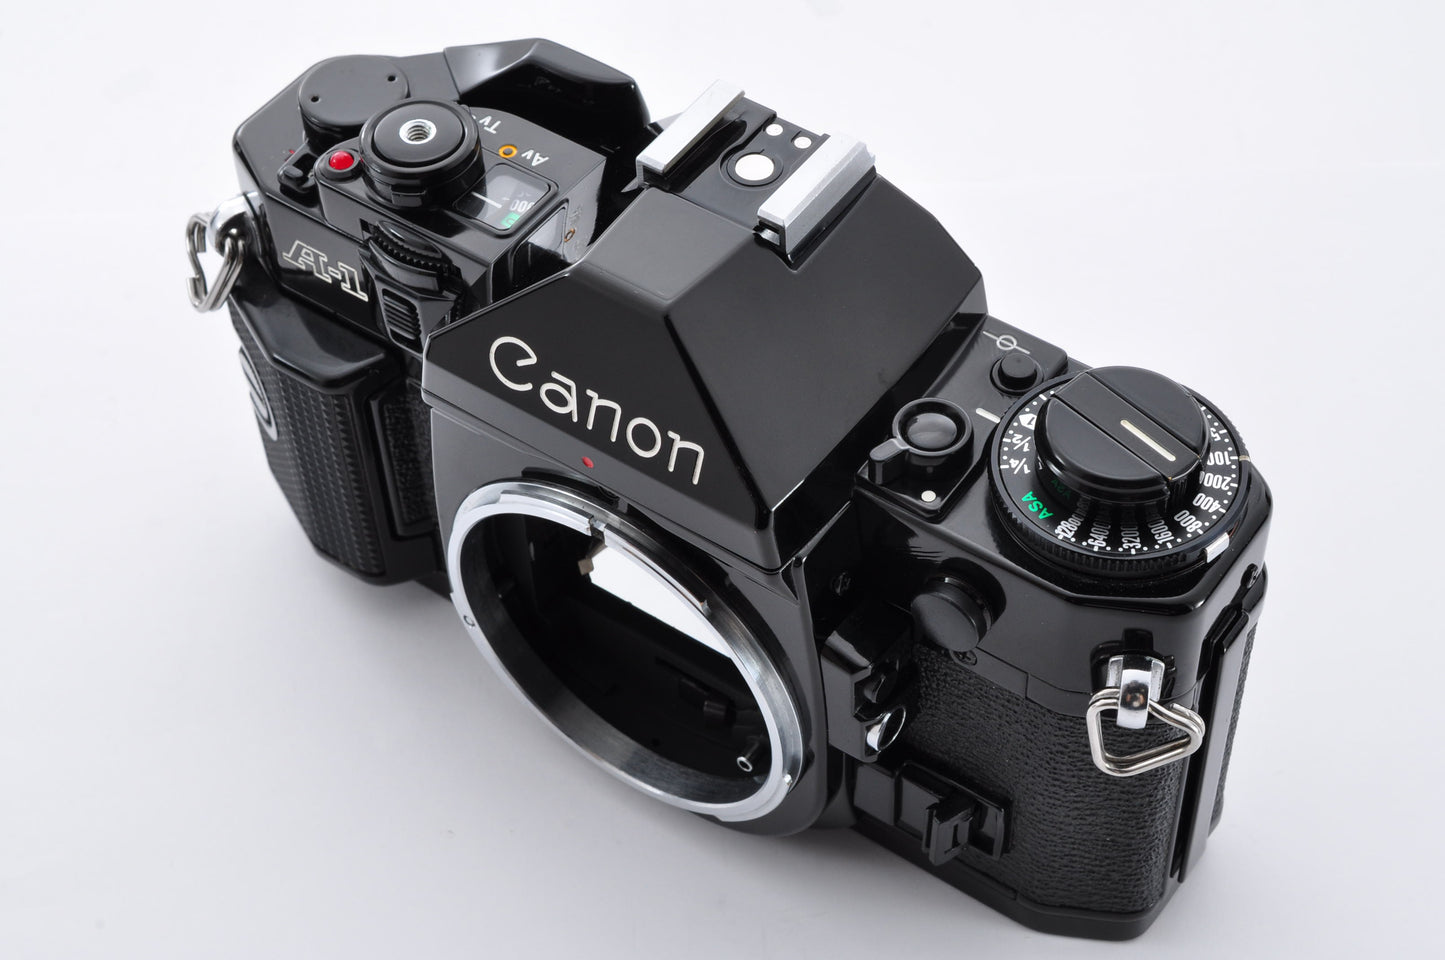 Canon A-1 SLR 35mm Film Camera New FD NFD 50mm f/1.4 Lens From Japan #464315